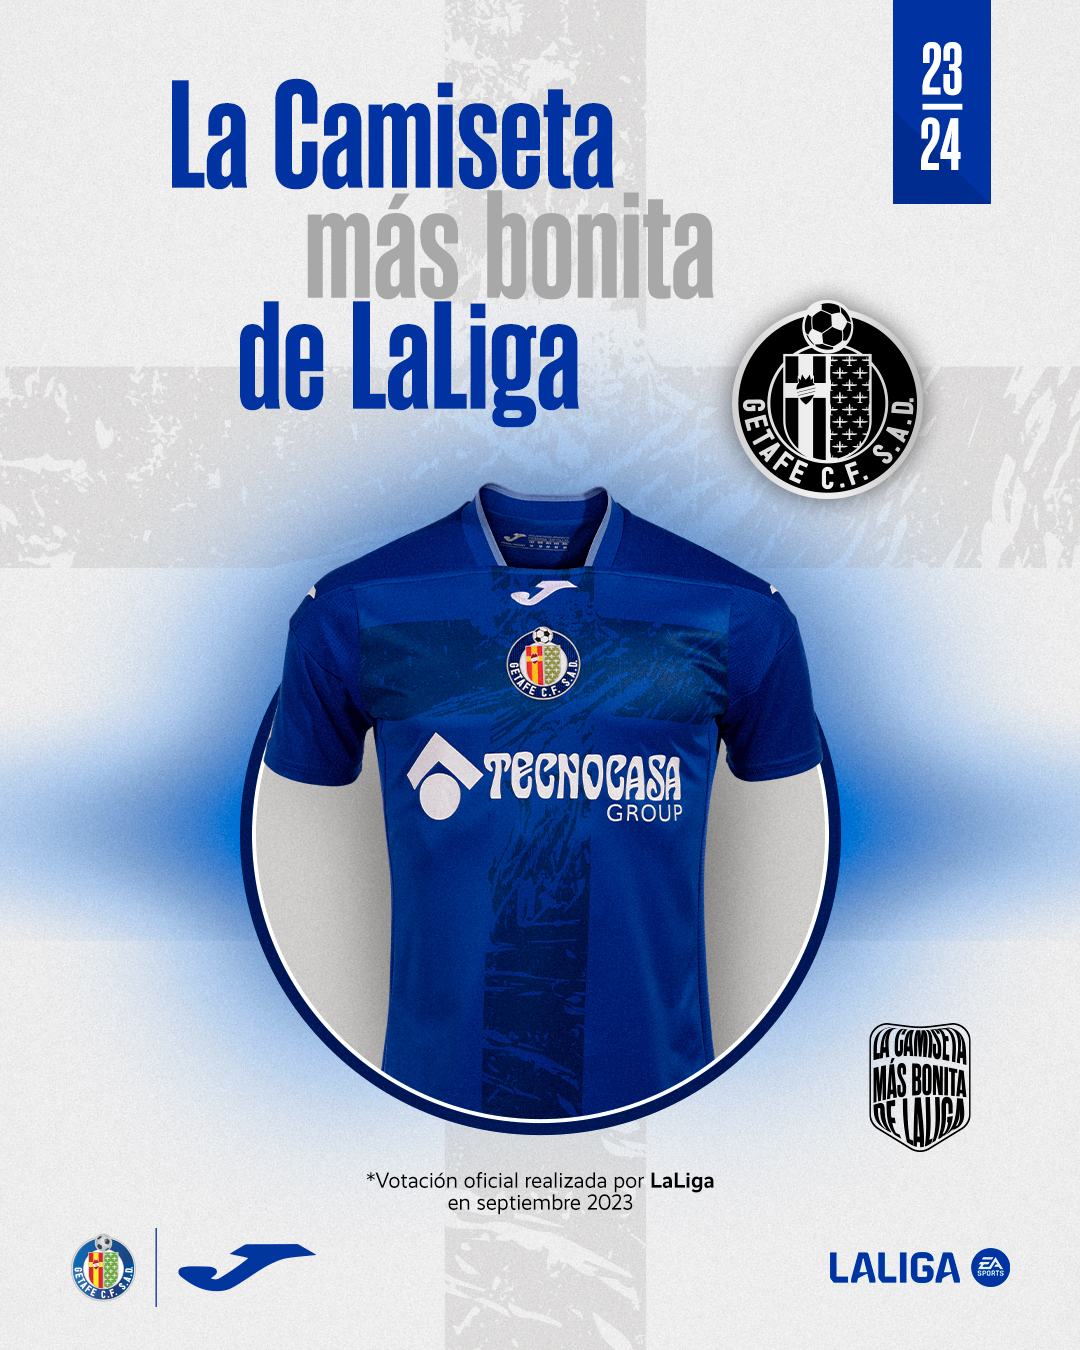 The most beautiful shirt in LaLiga!